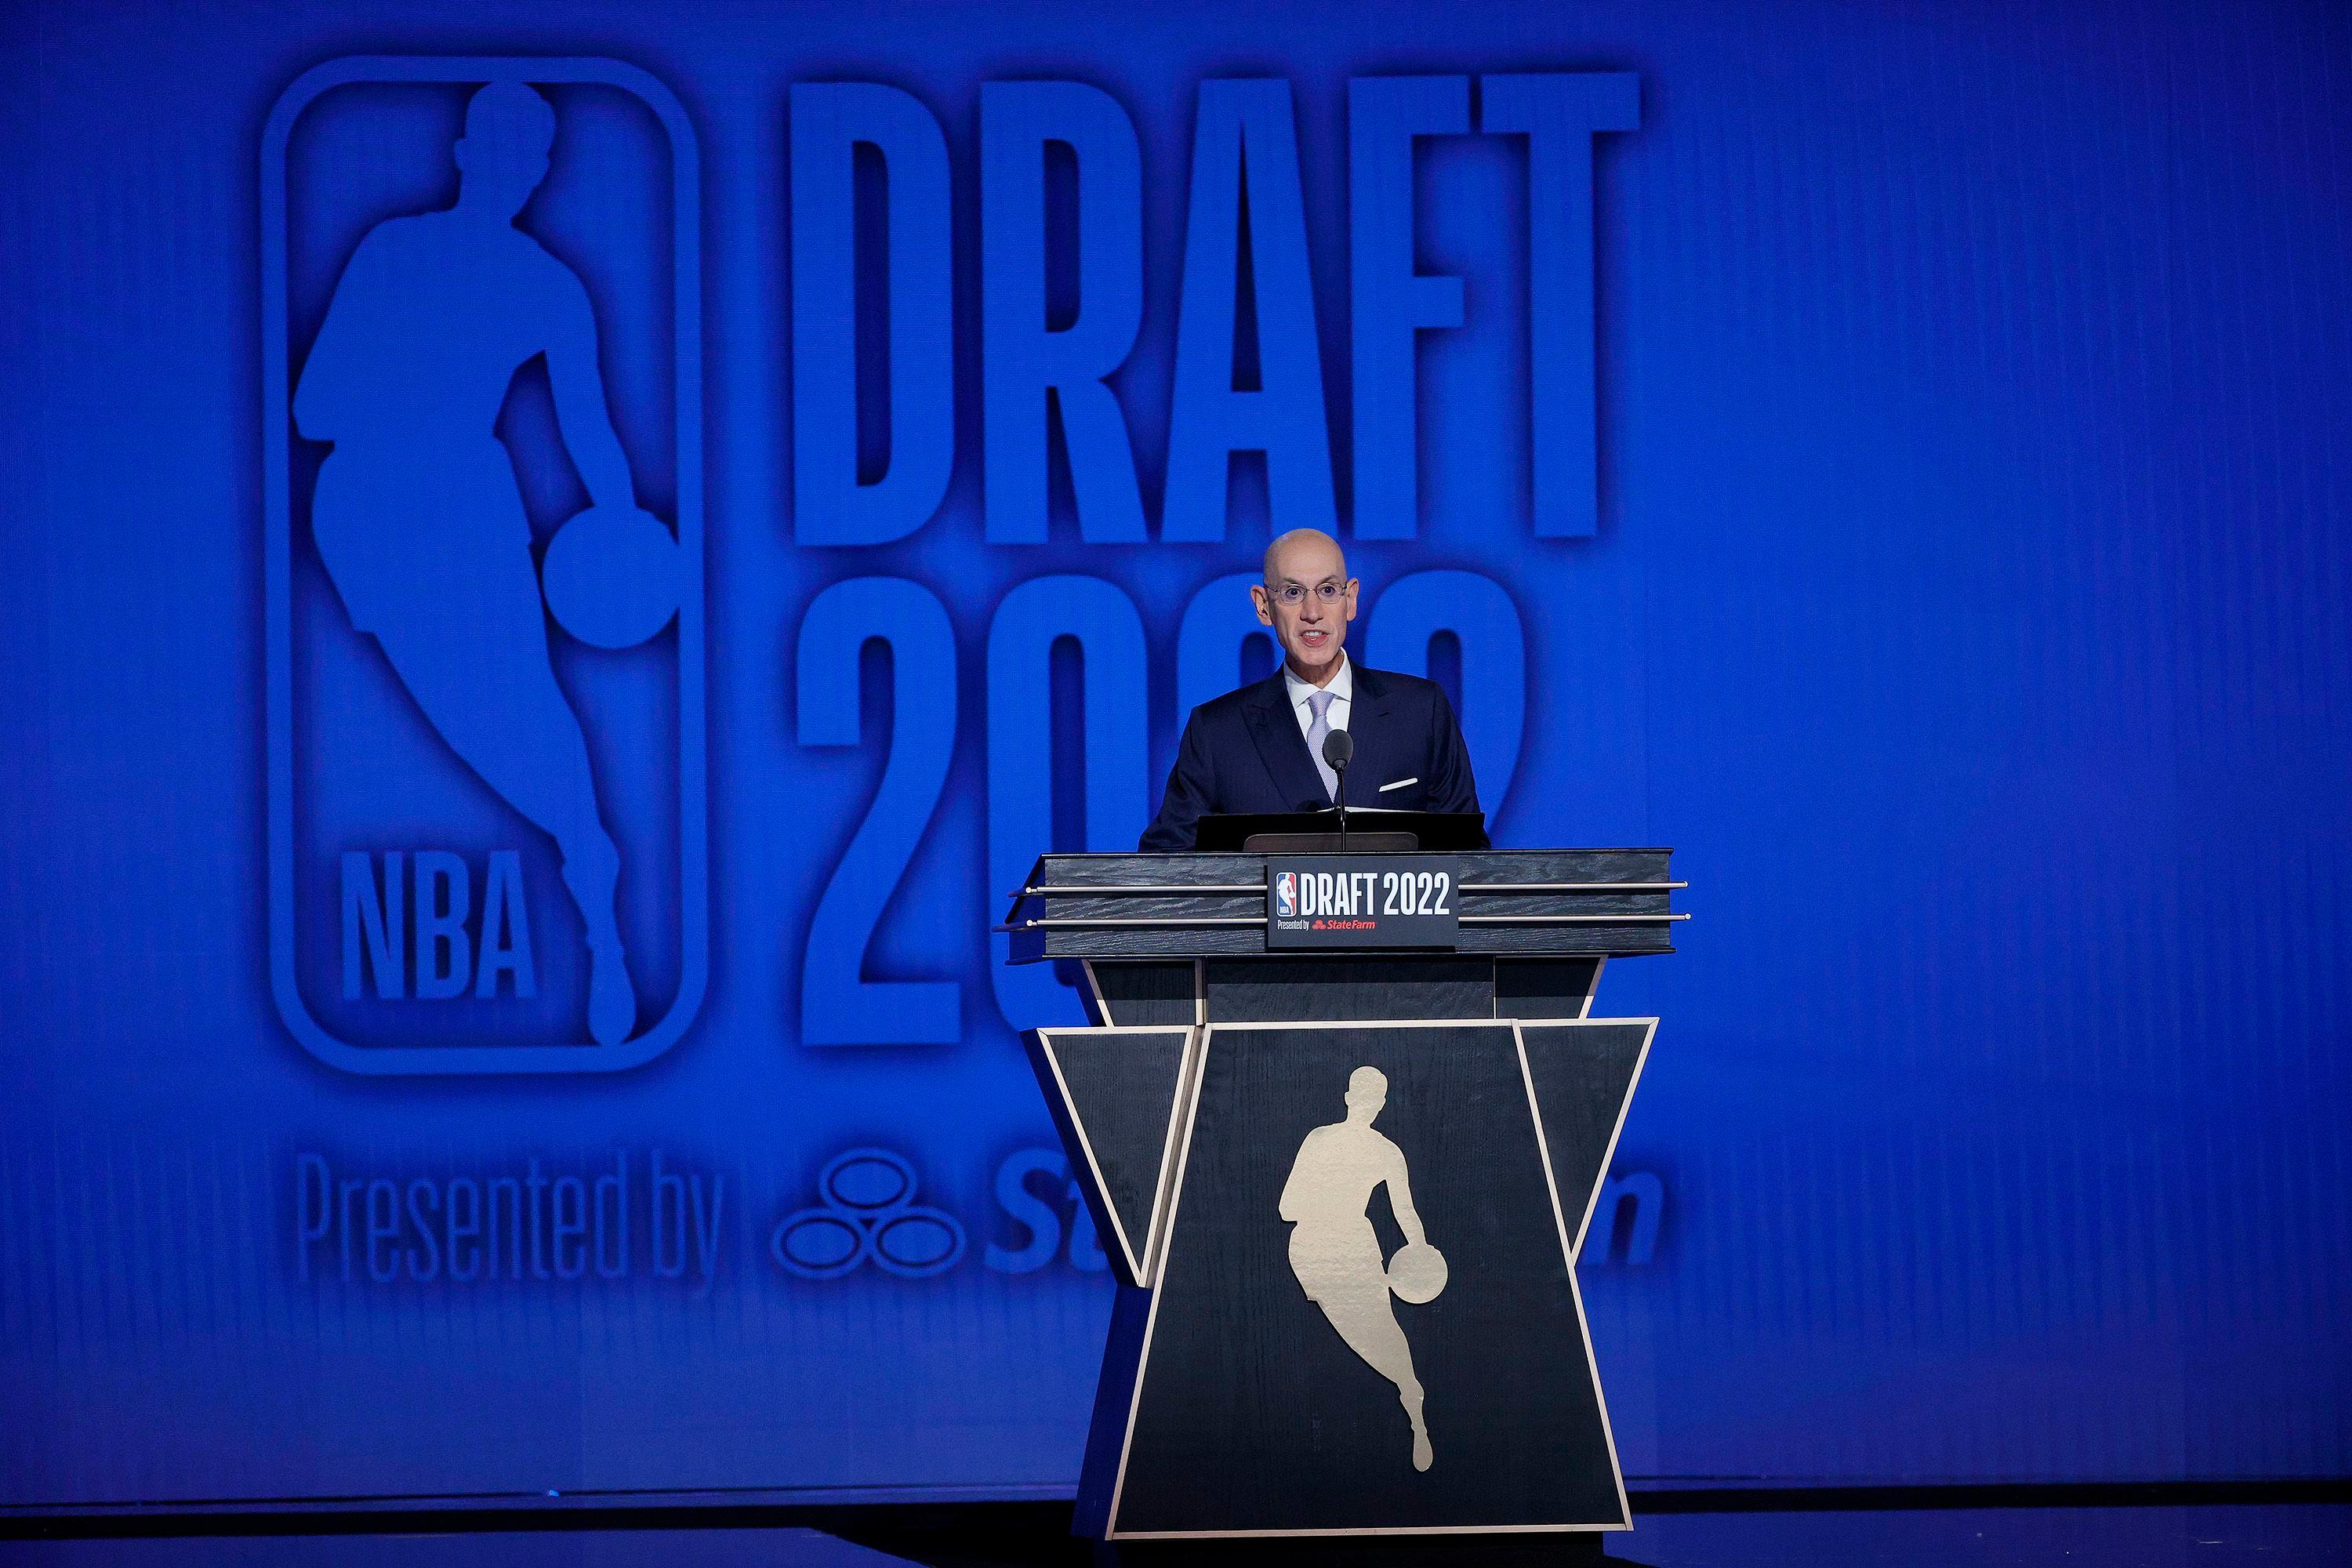 No lottery luck for the Chicago Bulls, who won’t have a 1st-round pick in this year’s NBA draft